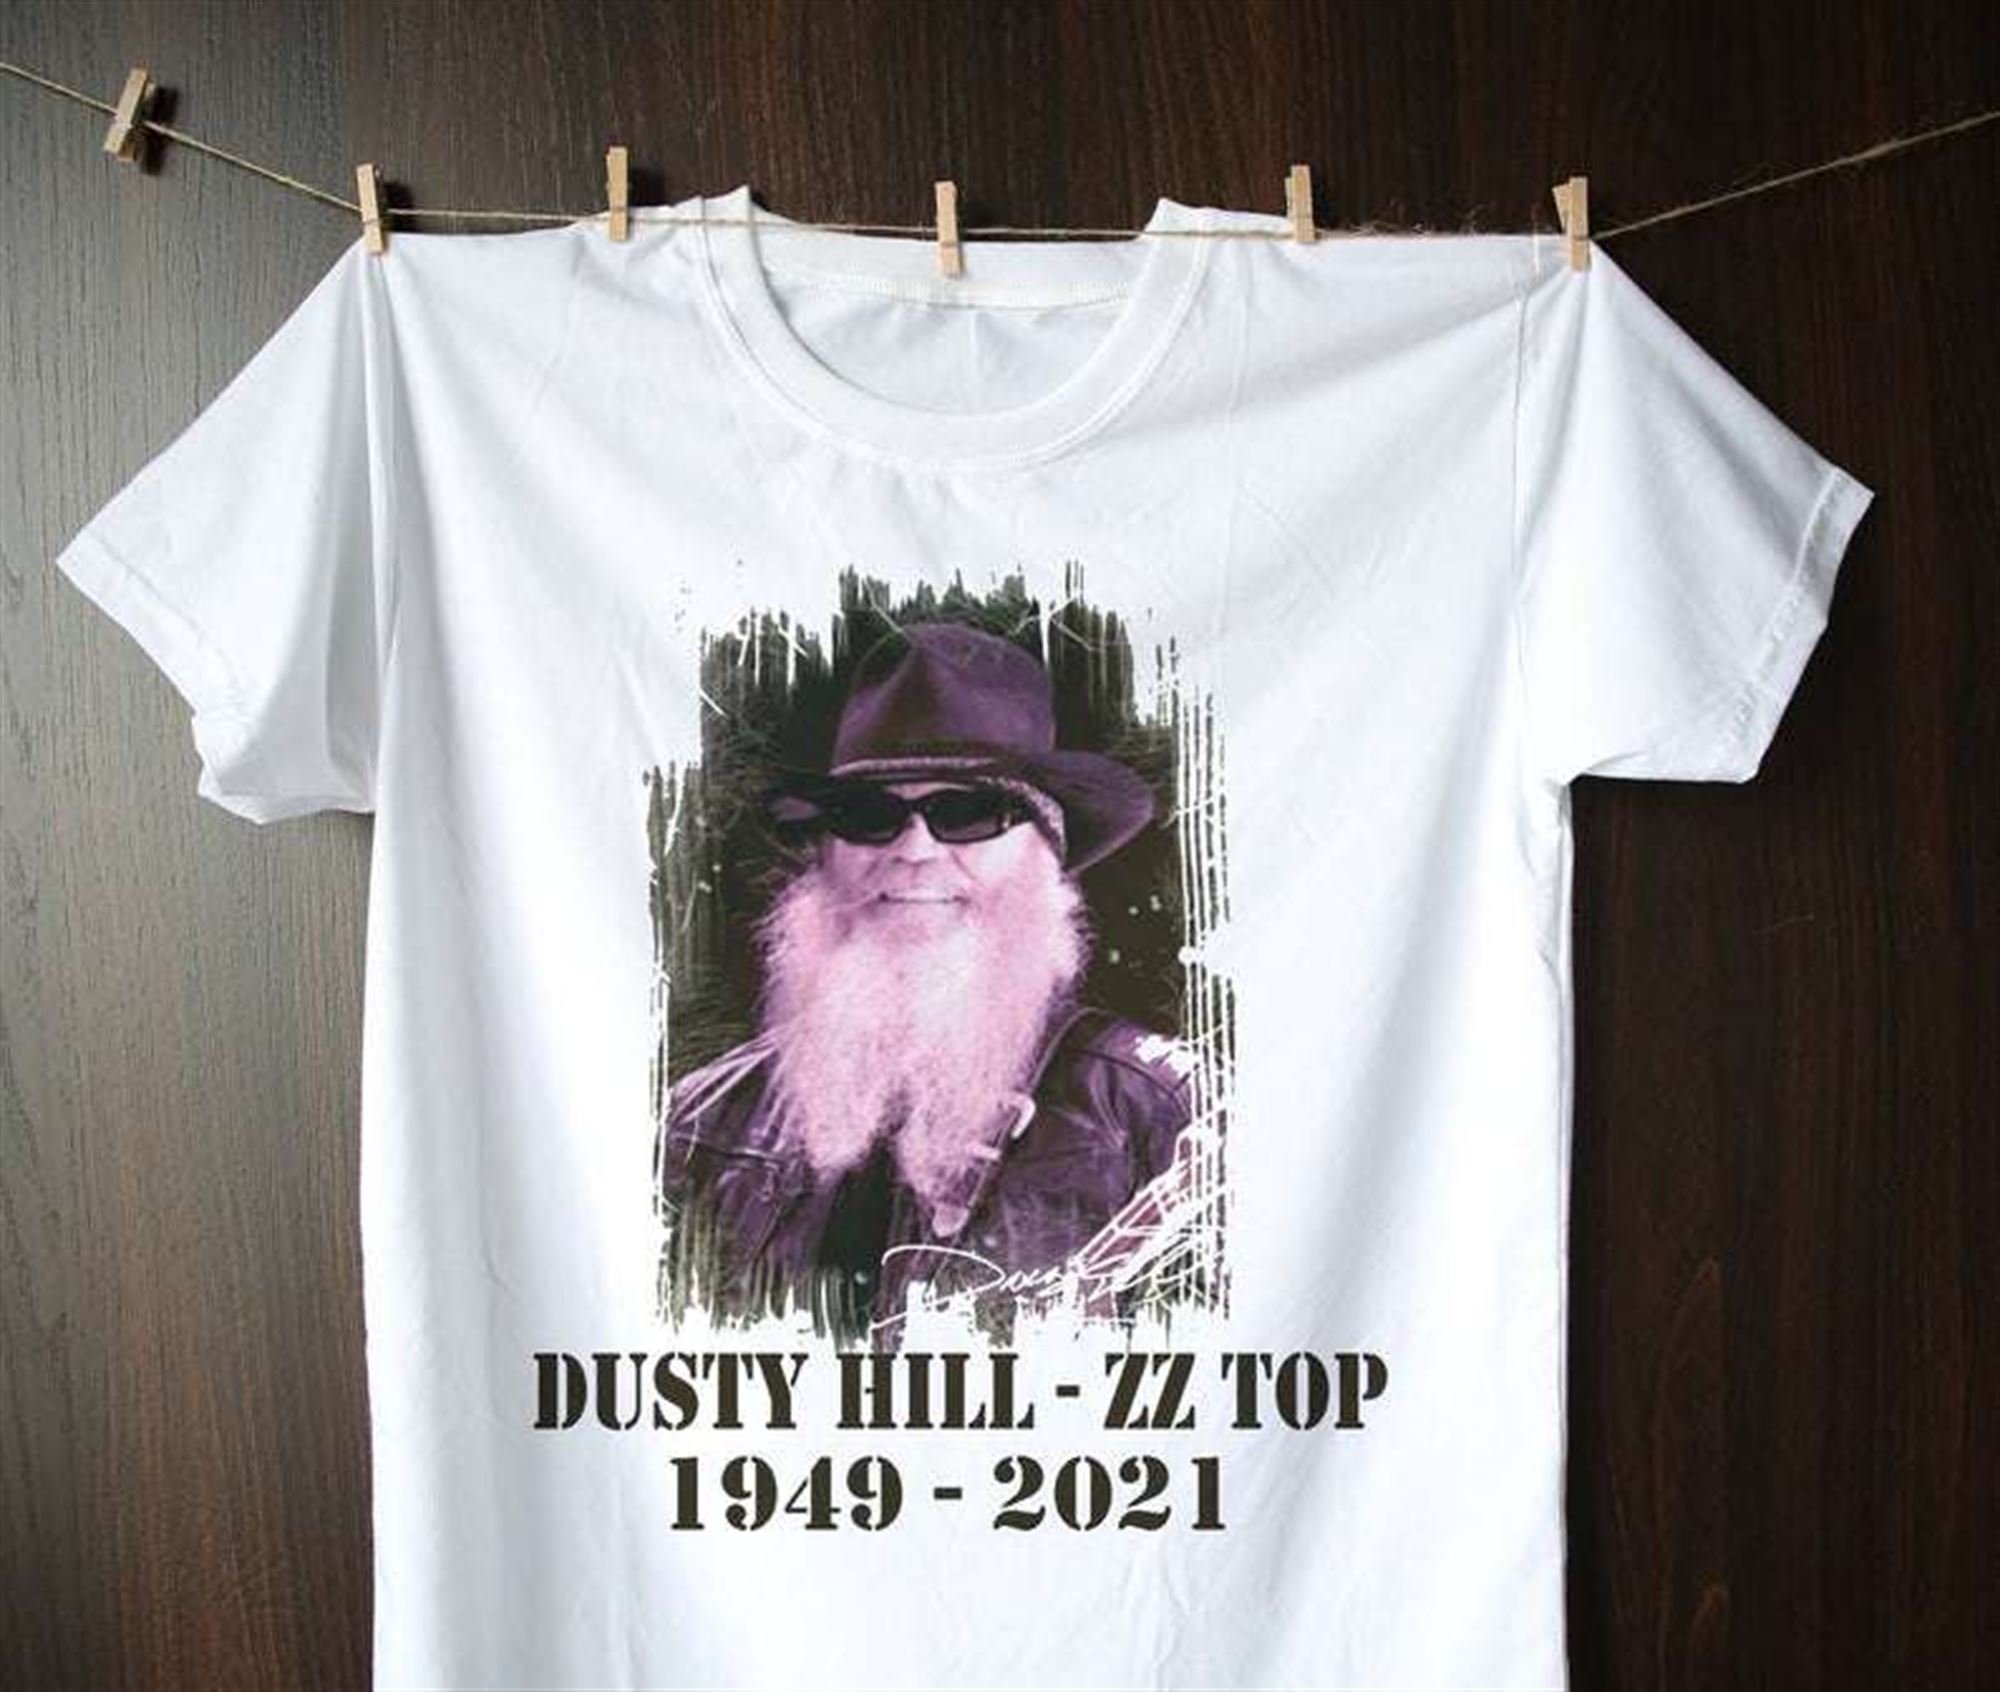 Dusty Hill Zz Top 1949-2021 Rip T Shirt Full Size Up To 5xl